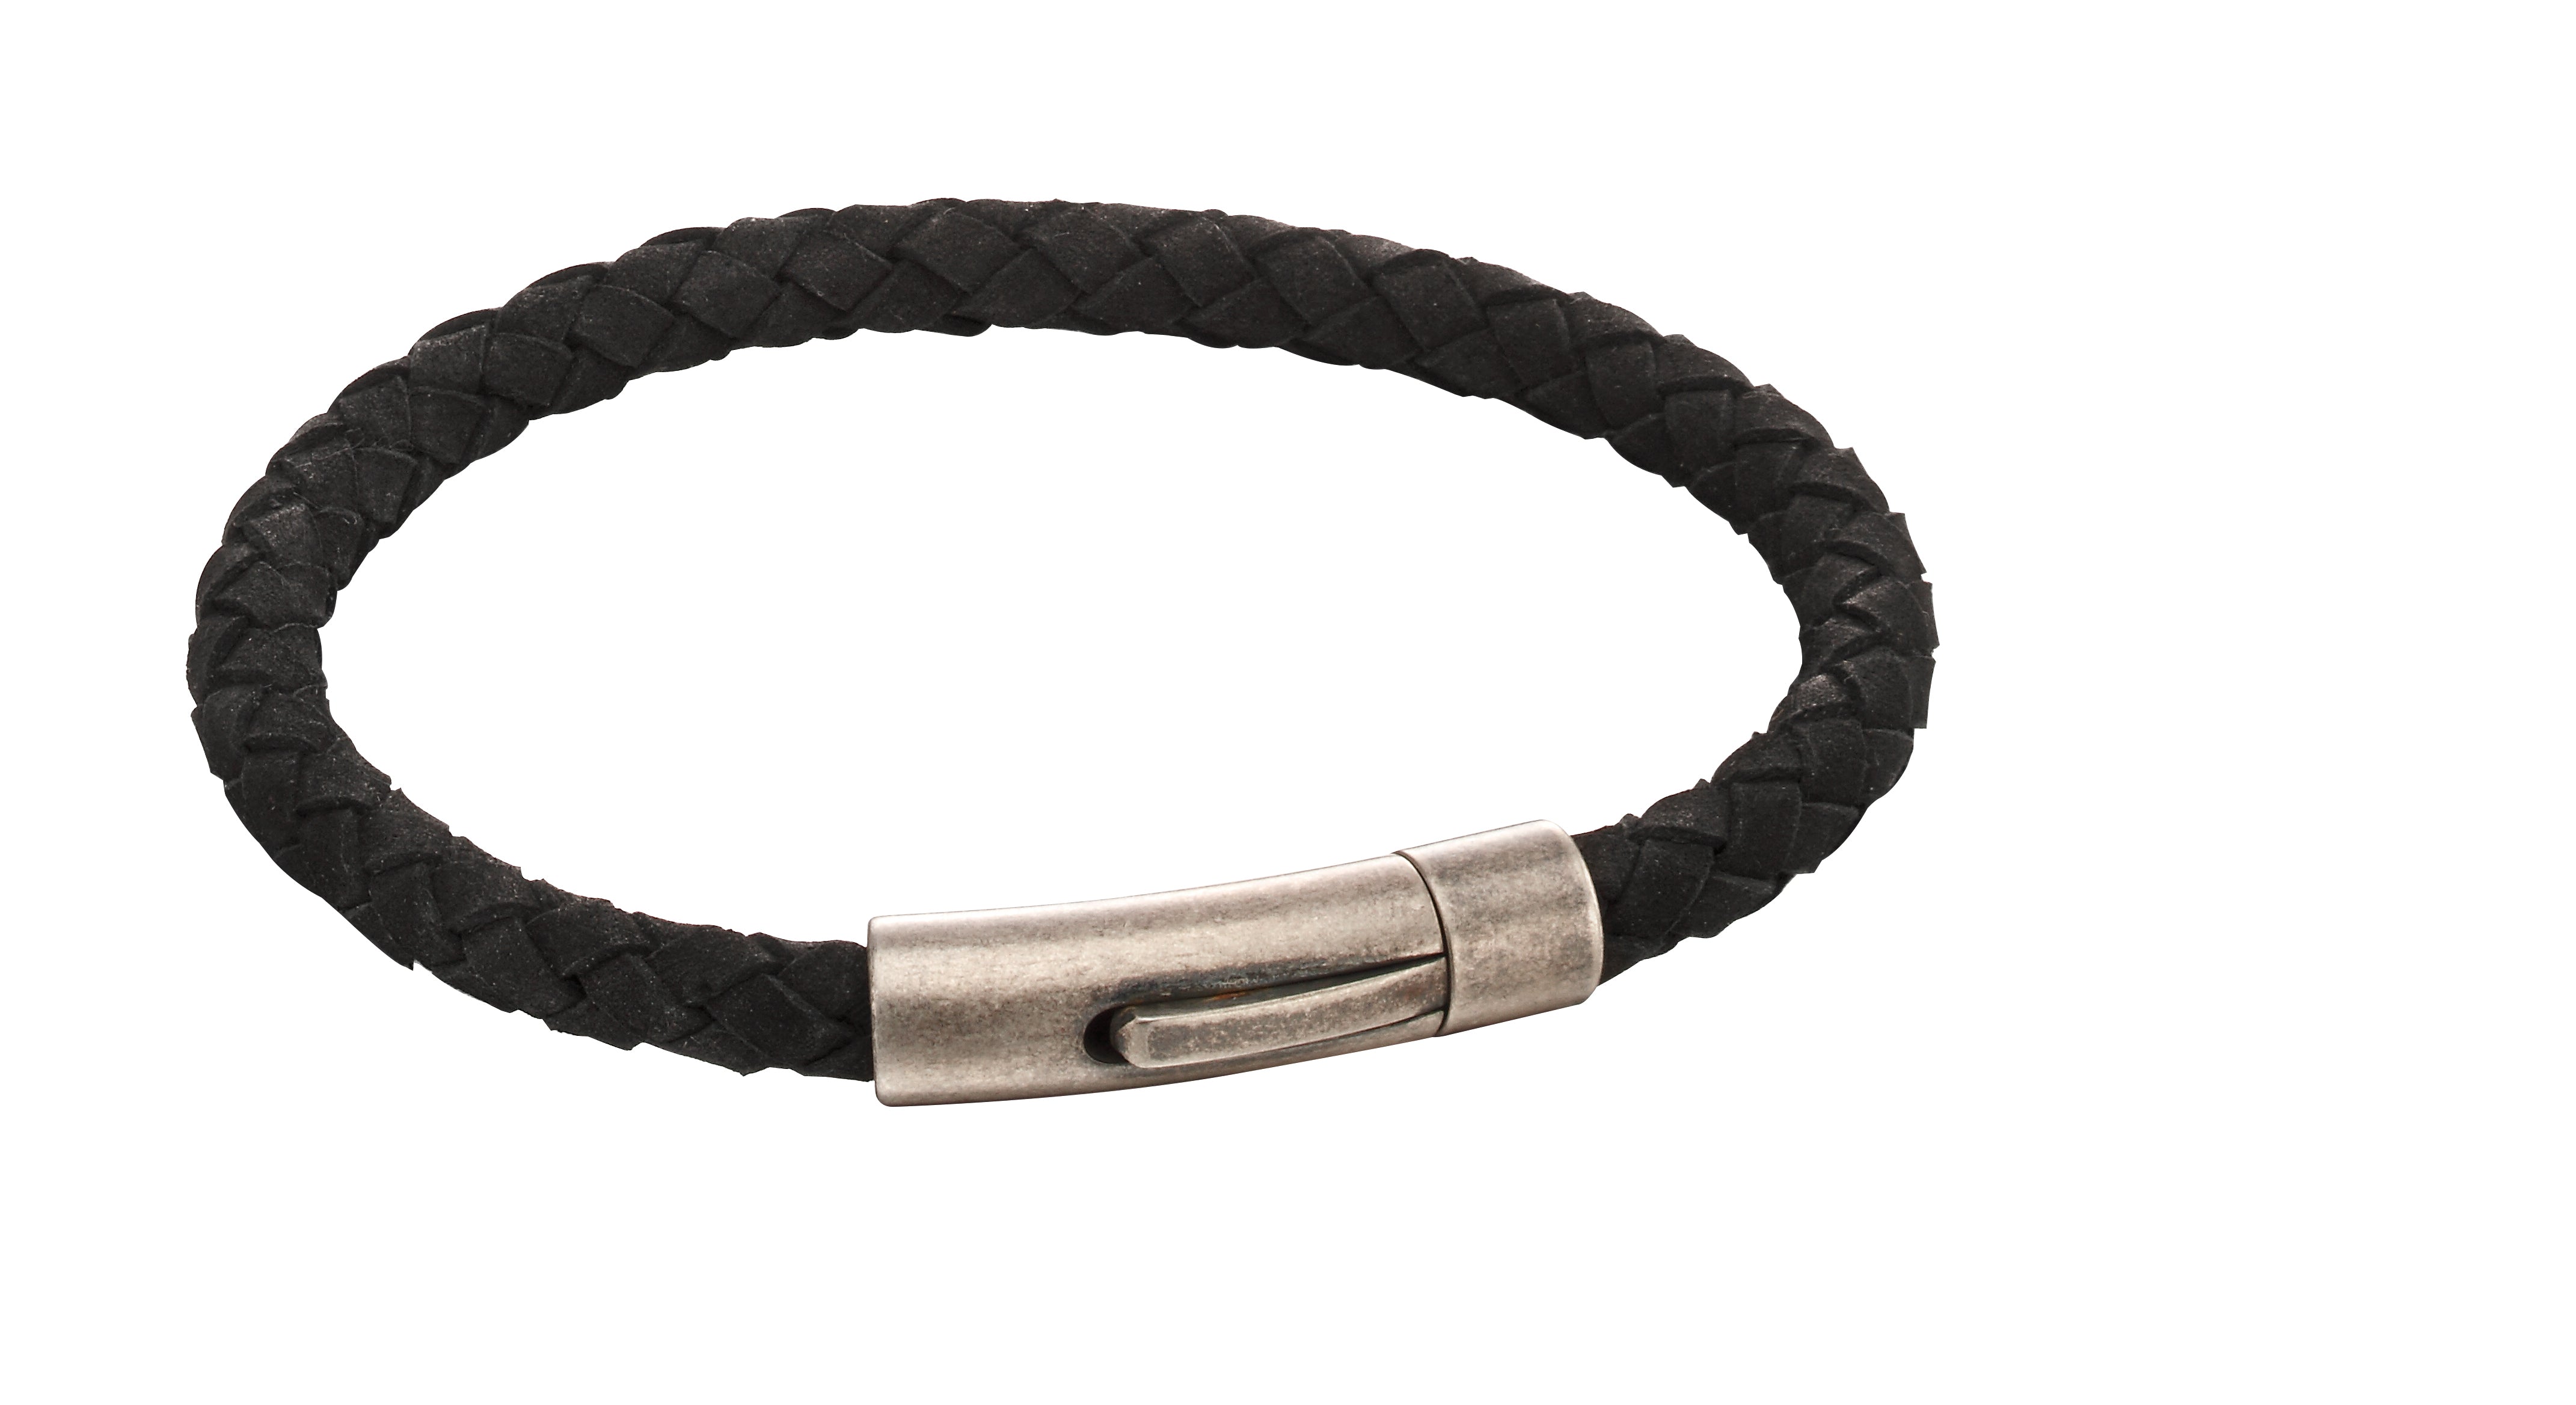 Stainless Steel & Black Woven Leather with Antique Silver Clasp Bracelet - FB0026 - Hallmark Jewellers Formby & The Jewellers Bench Widnes